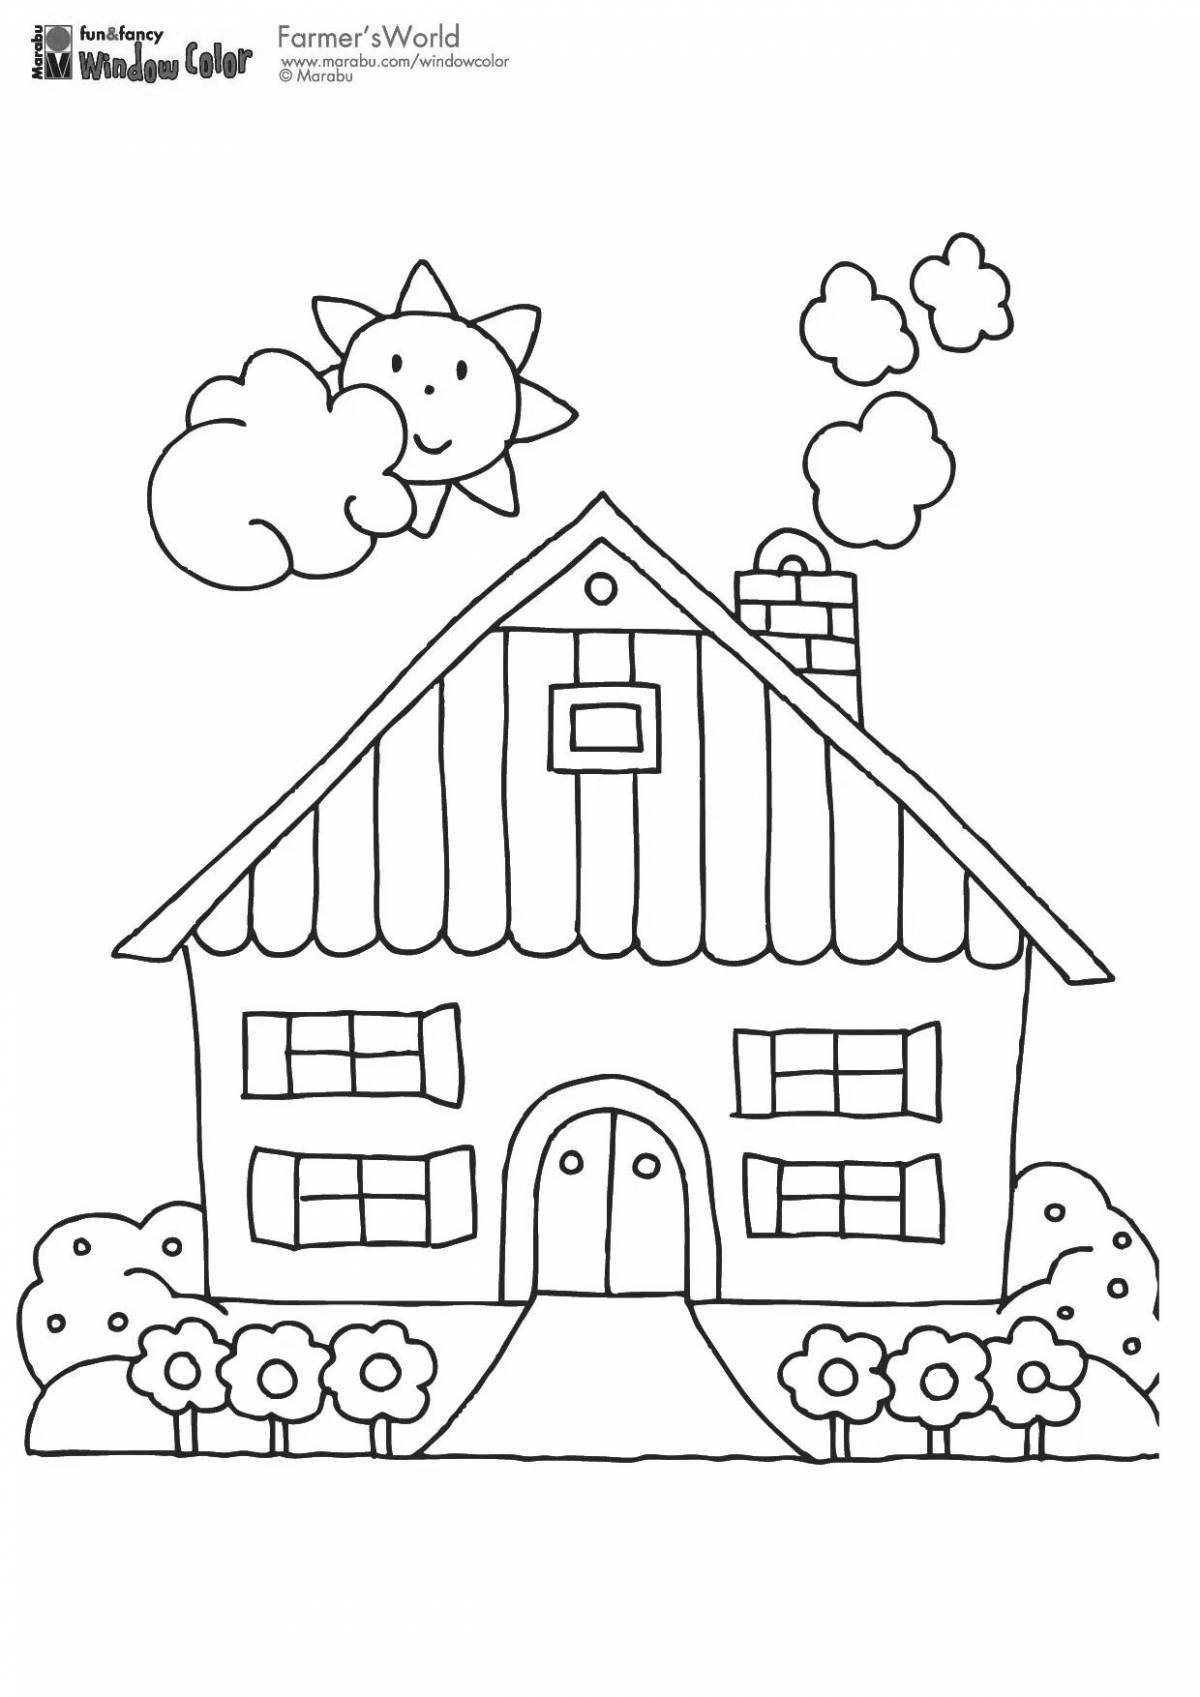 Cute house coloring book for 4-5 year olds